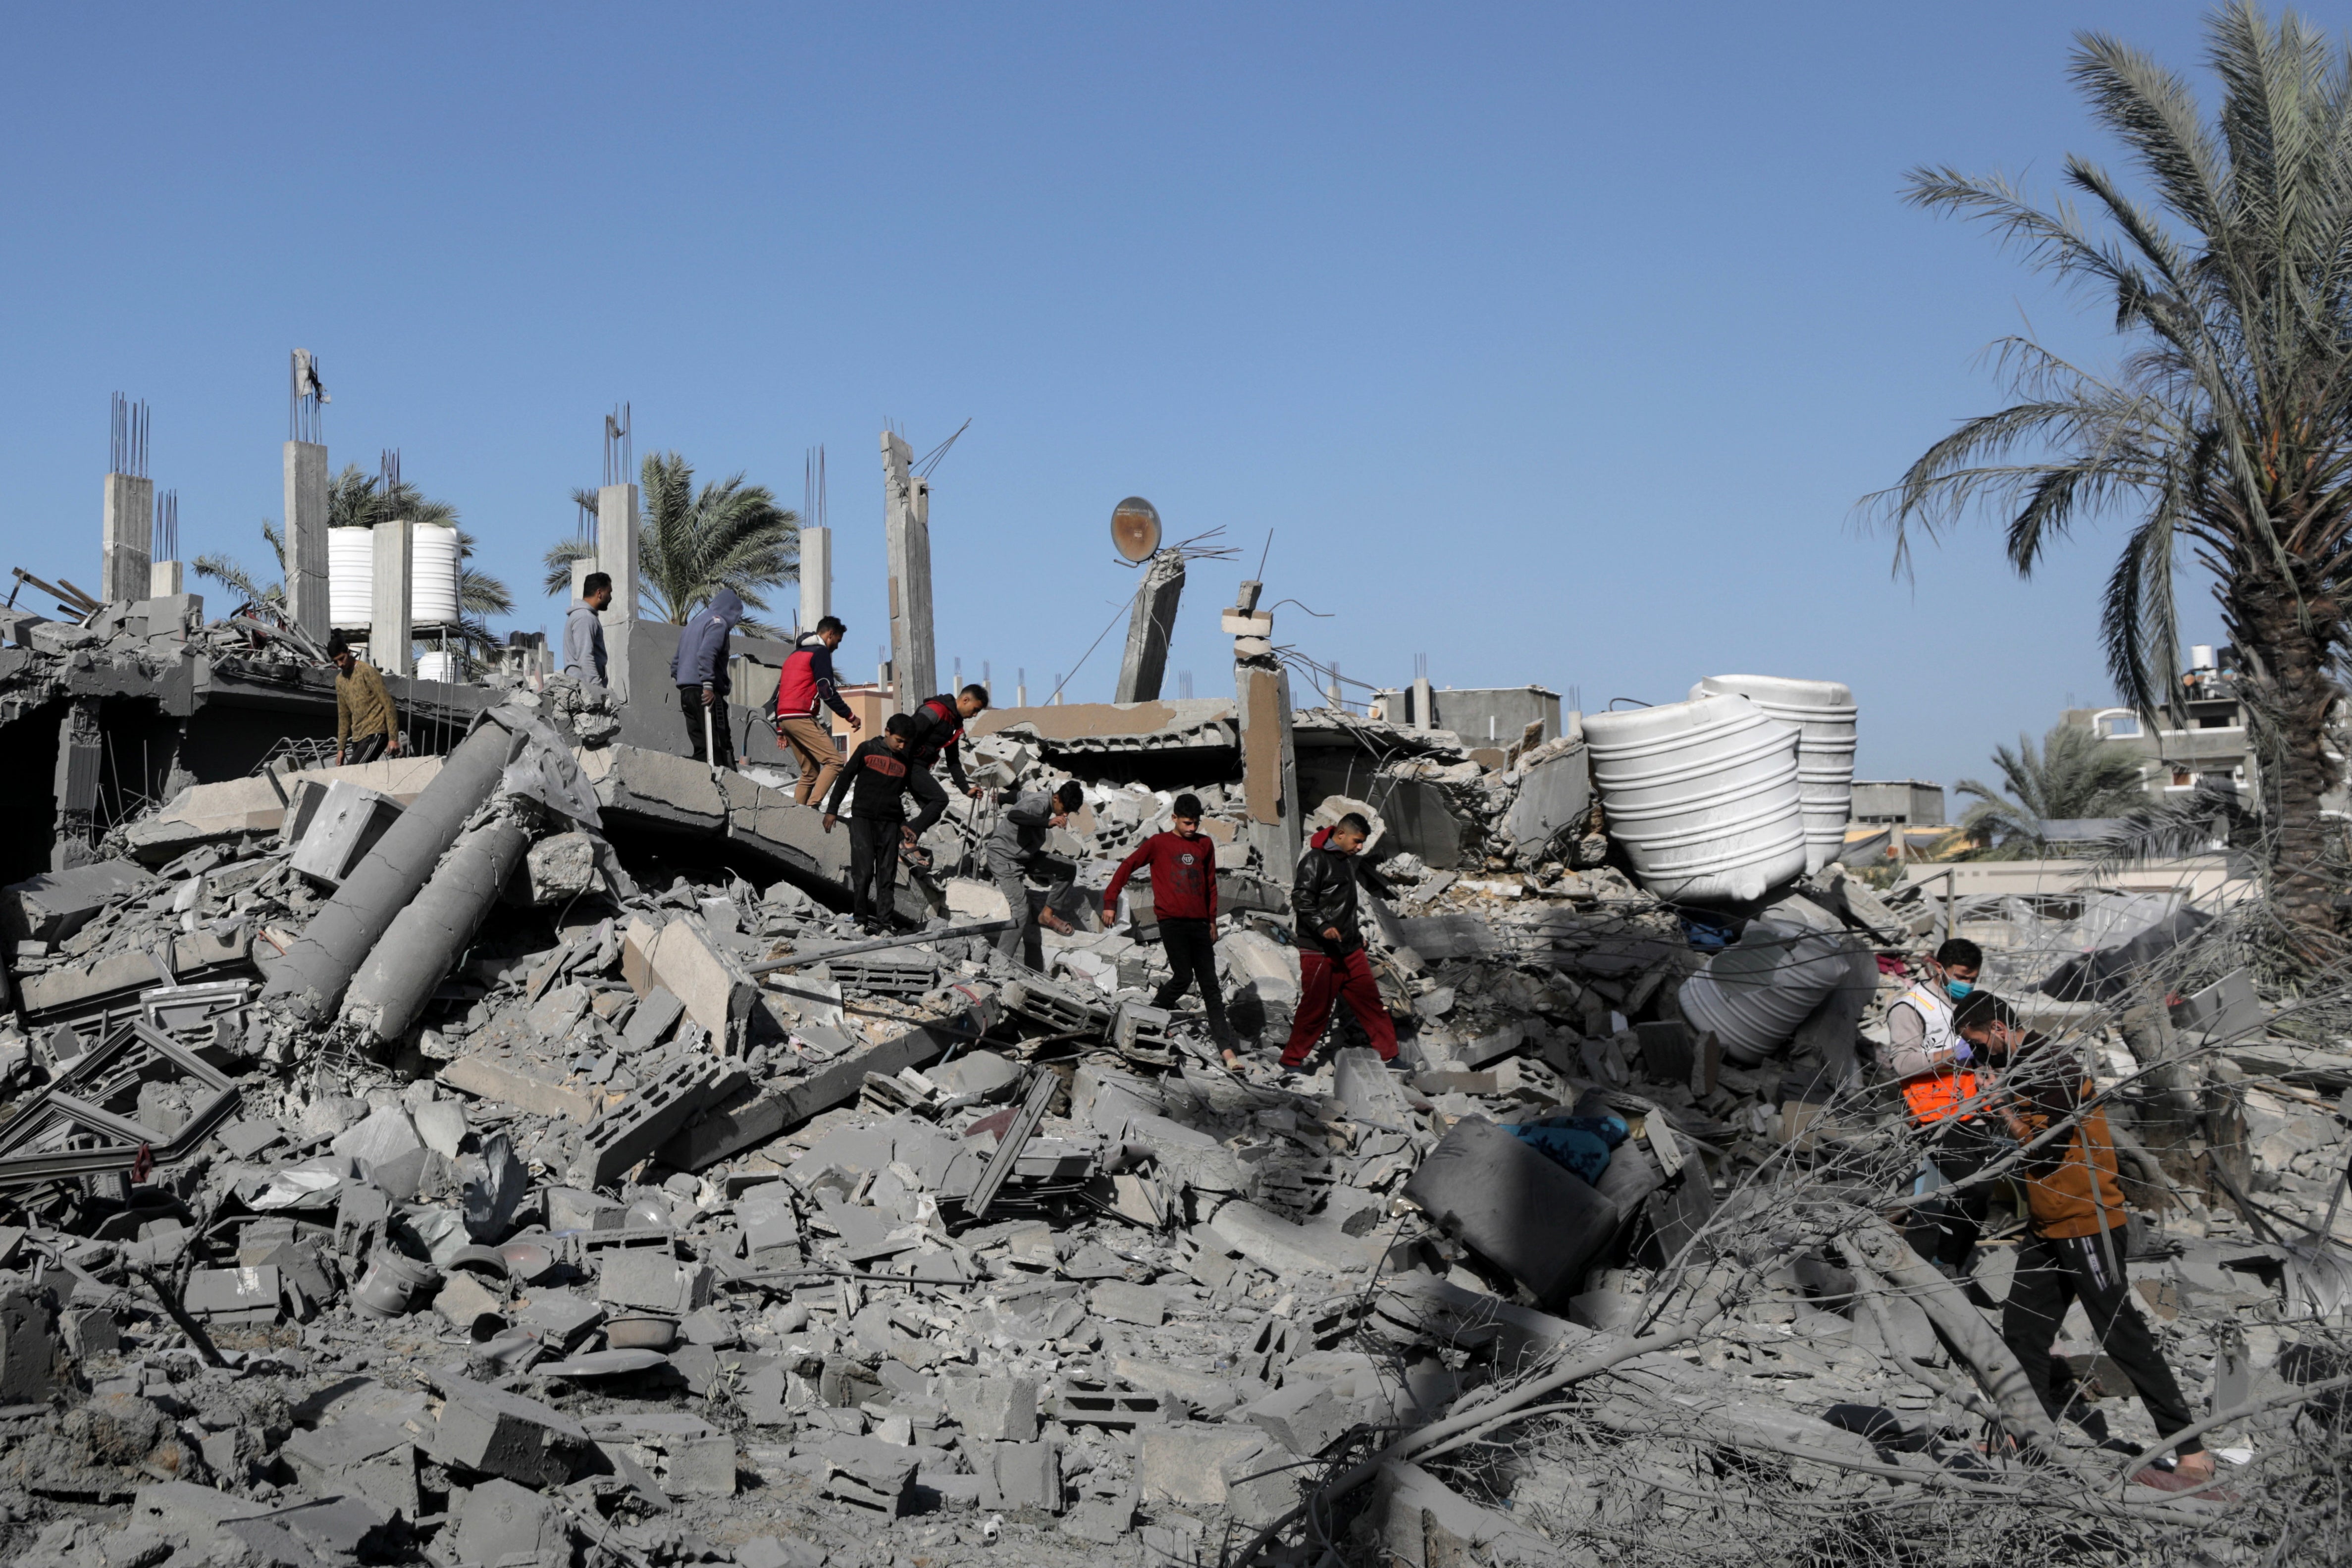 Palestinians walk among rubble of buildings in Al-Nuseirat refugee camp in Gaza on 22 December after it was bombed by Israeli airstrikes